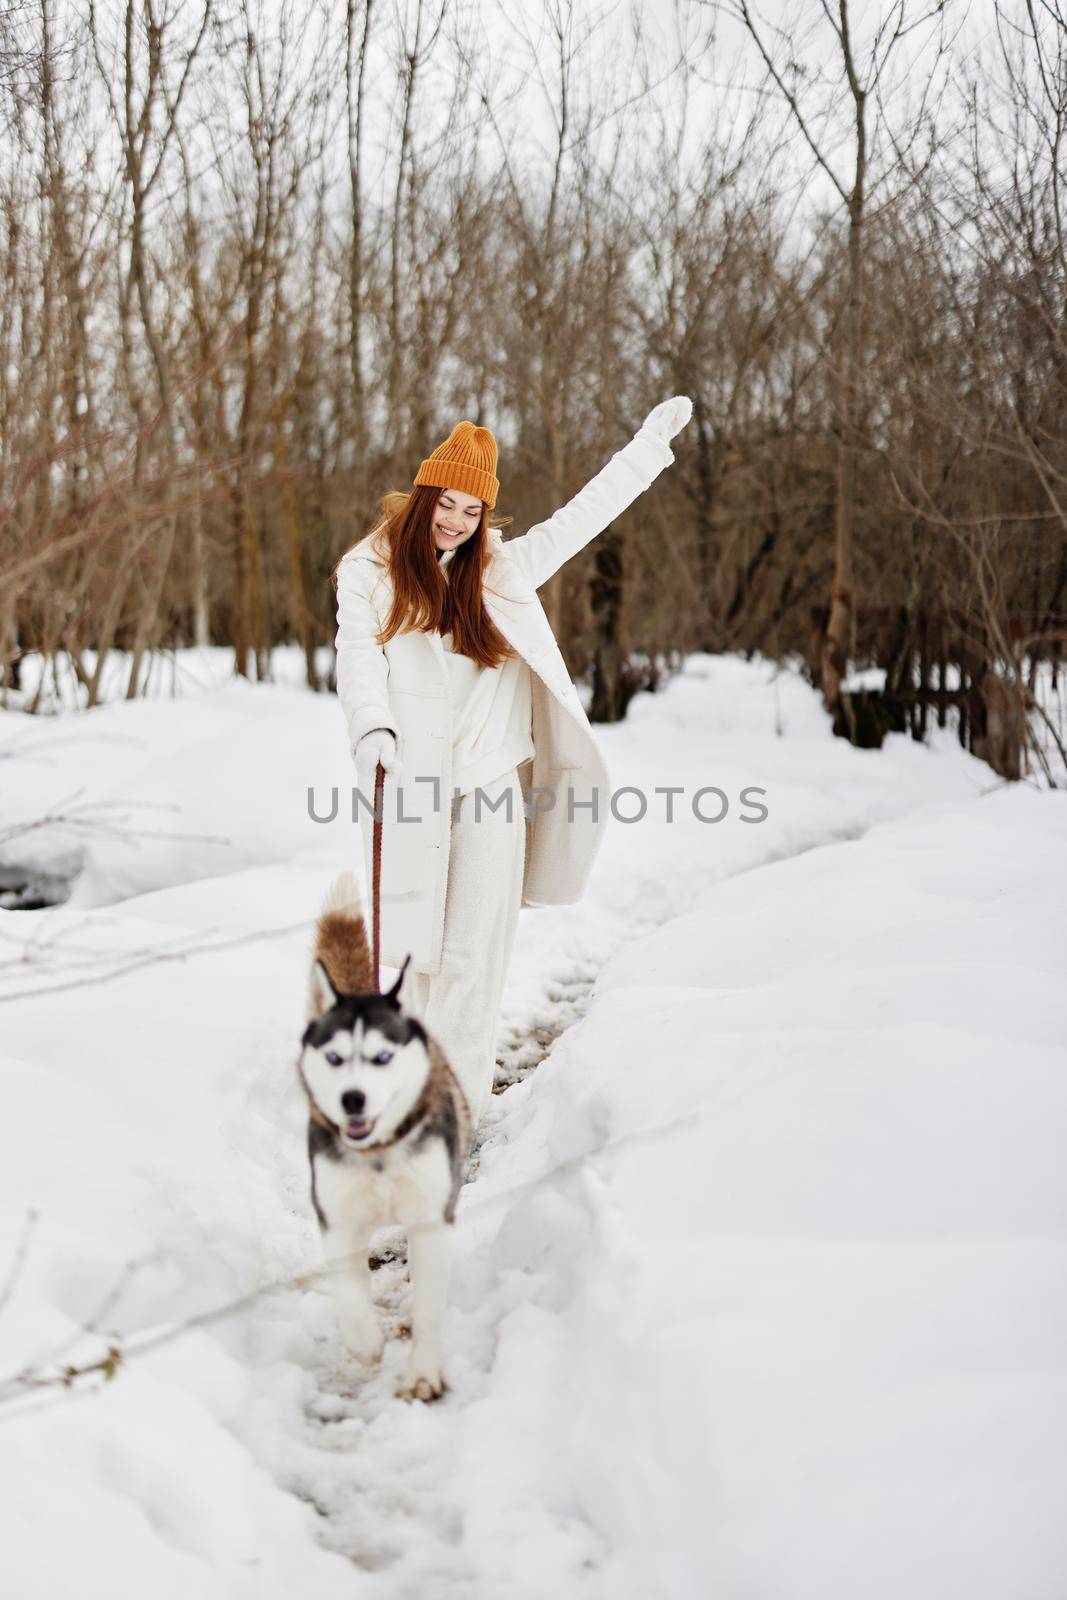 cheerful woman winter outdoors with a dog fun nature winter holidays. High quality photo